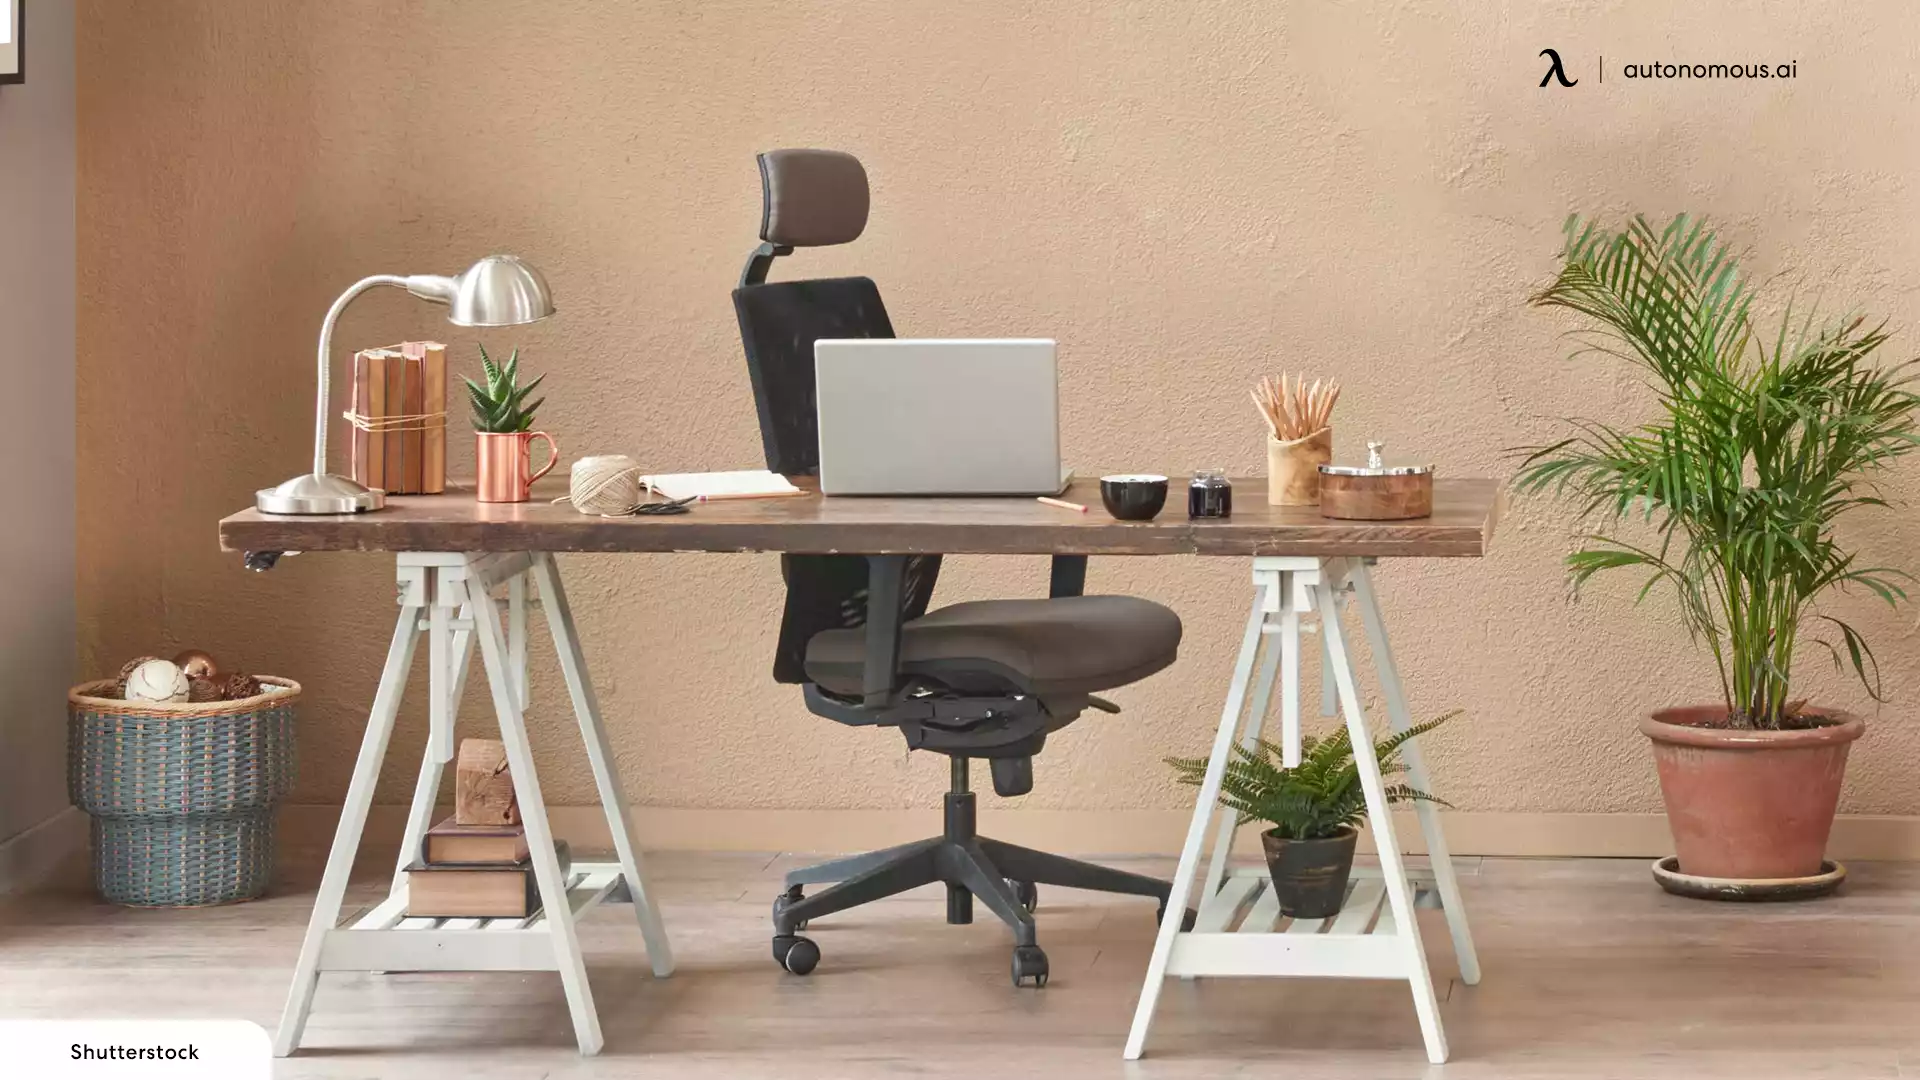 Should You Buy a Heating Office Chair For Your Workspace?